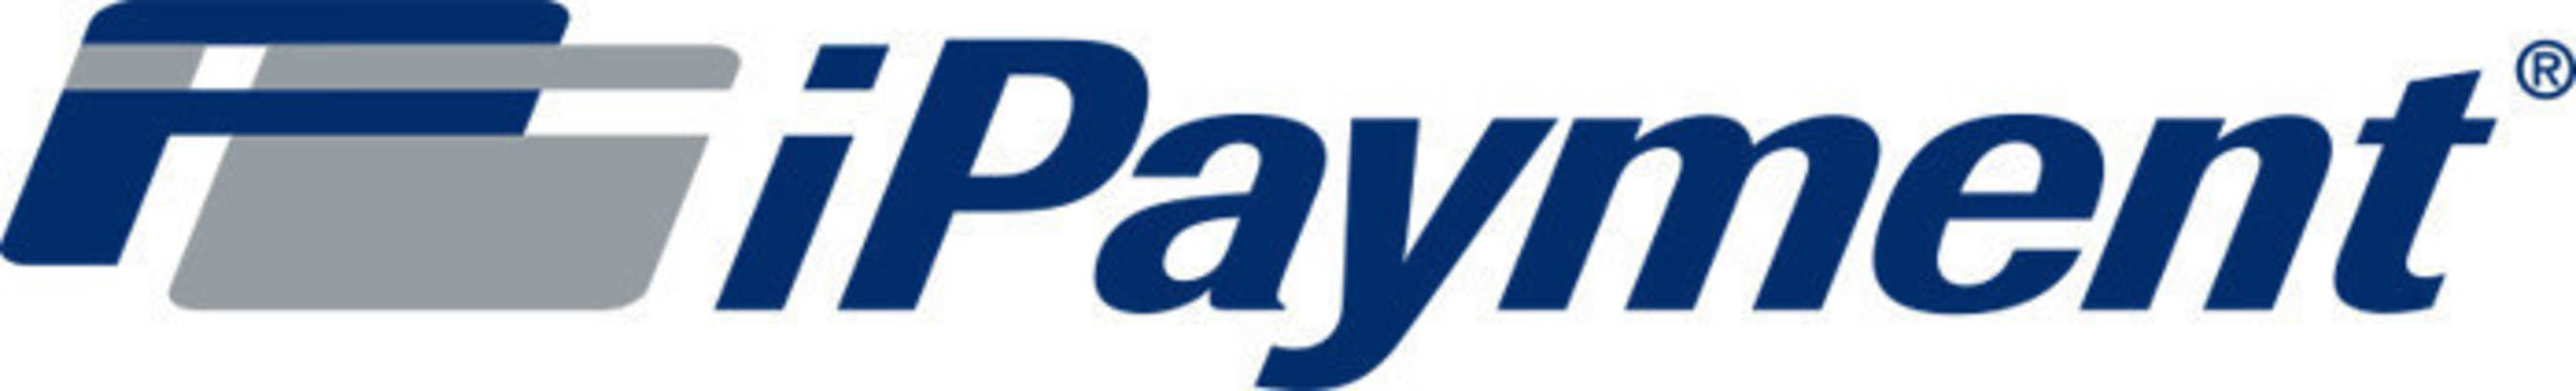 womply partners iPayment logo